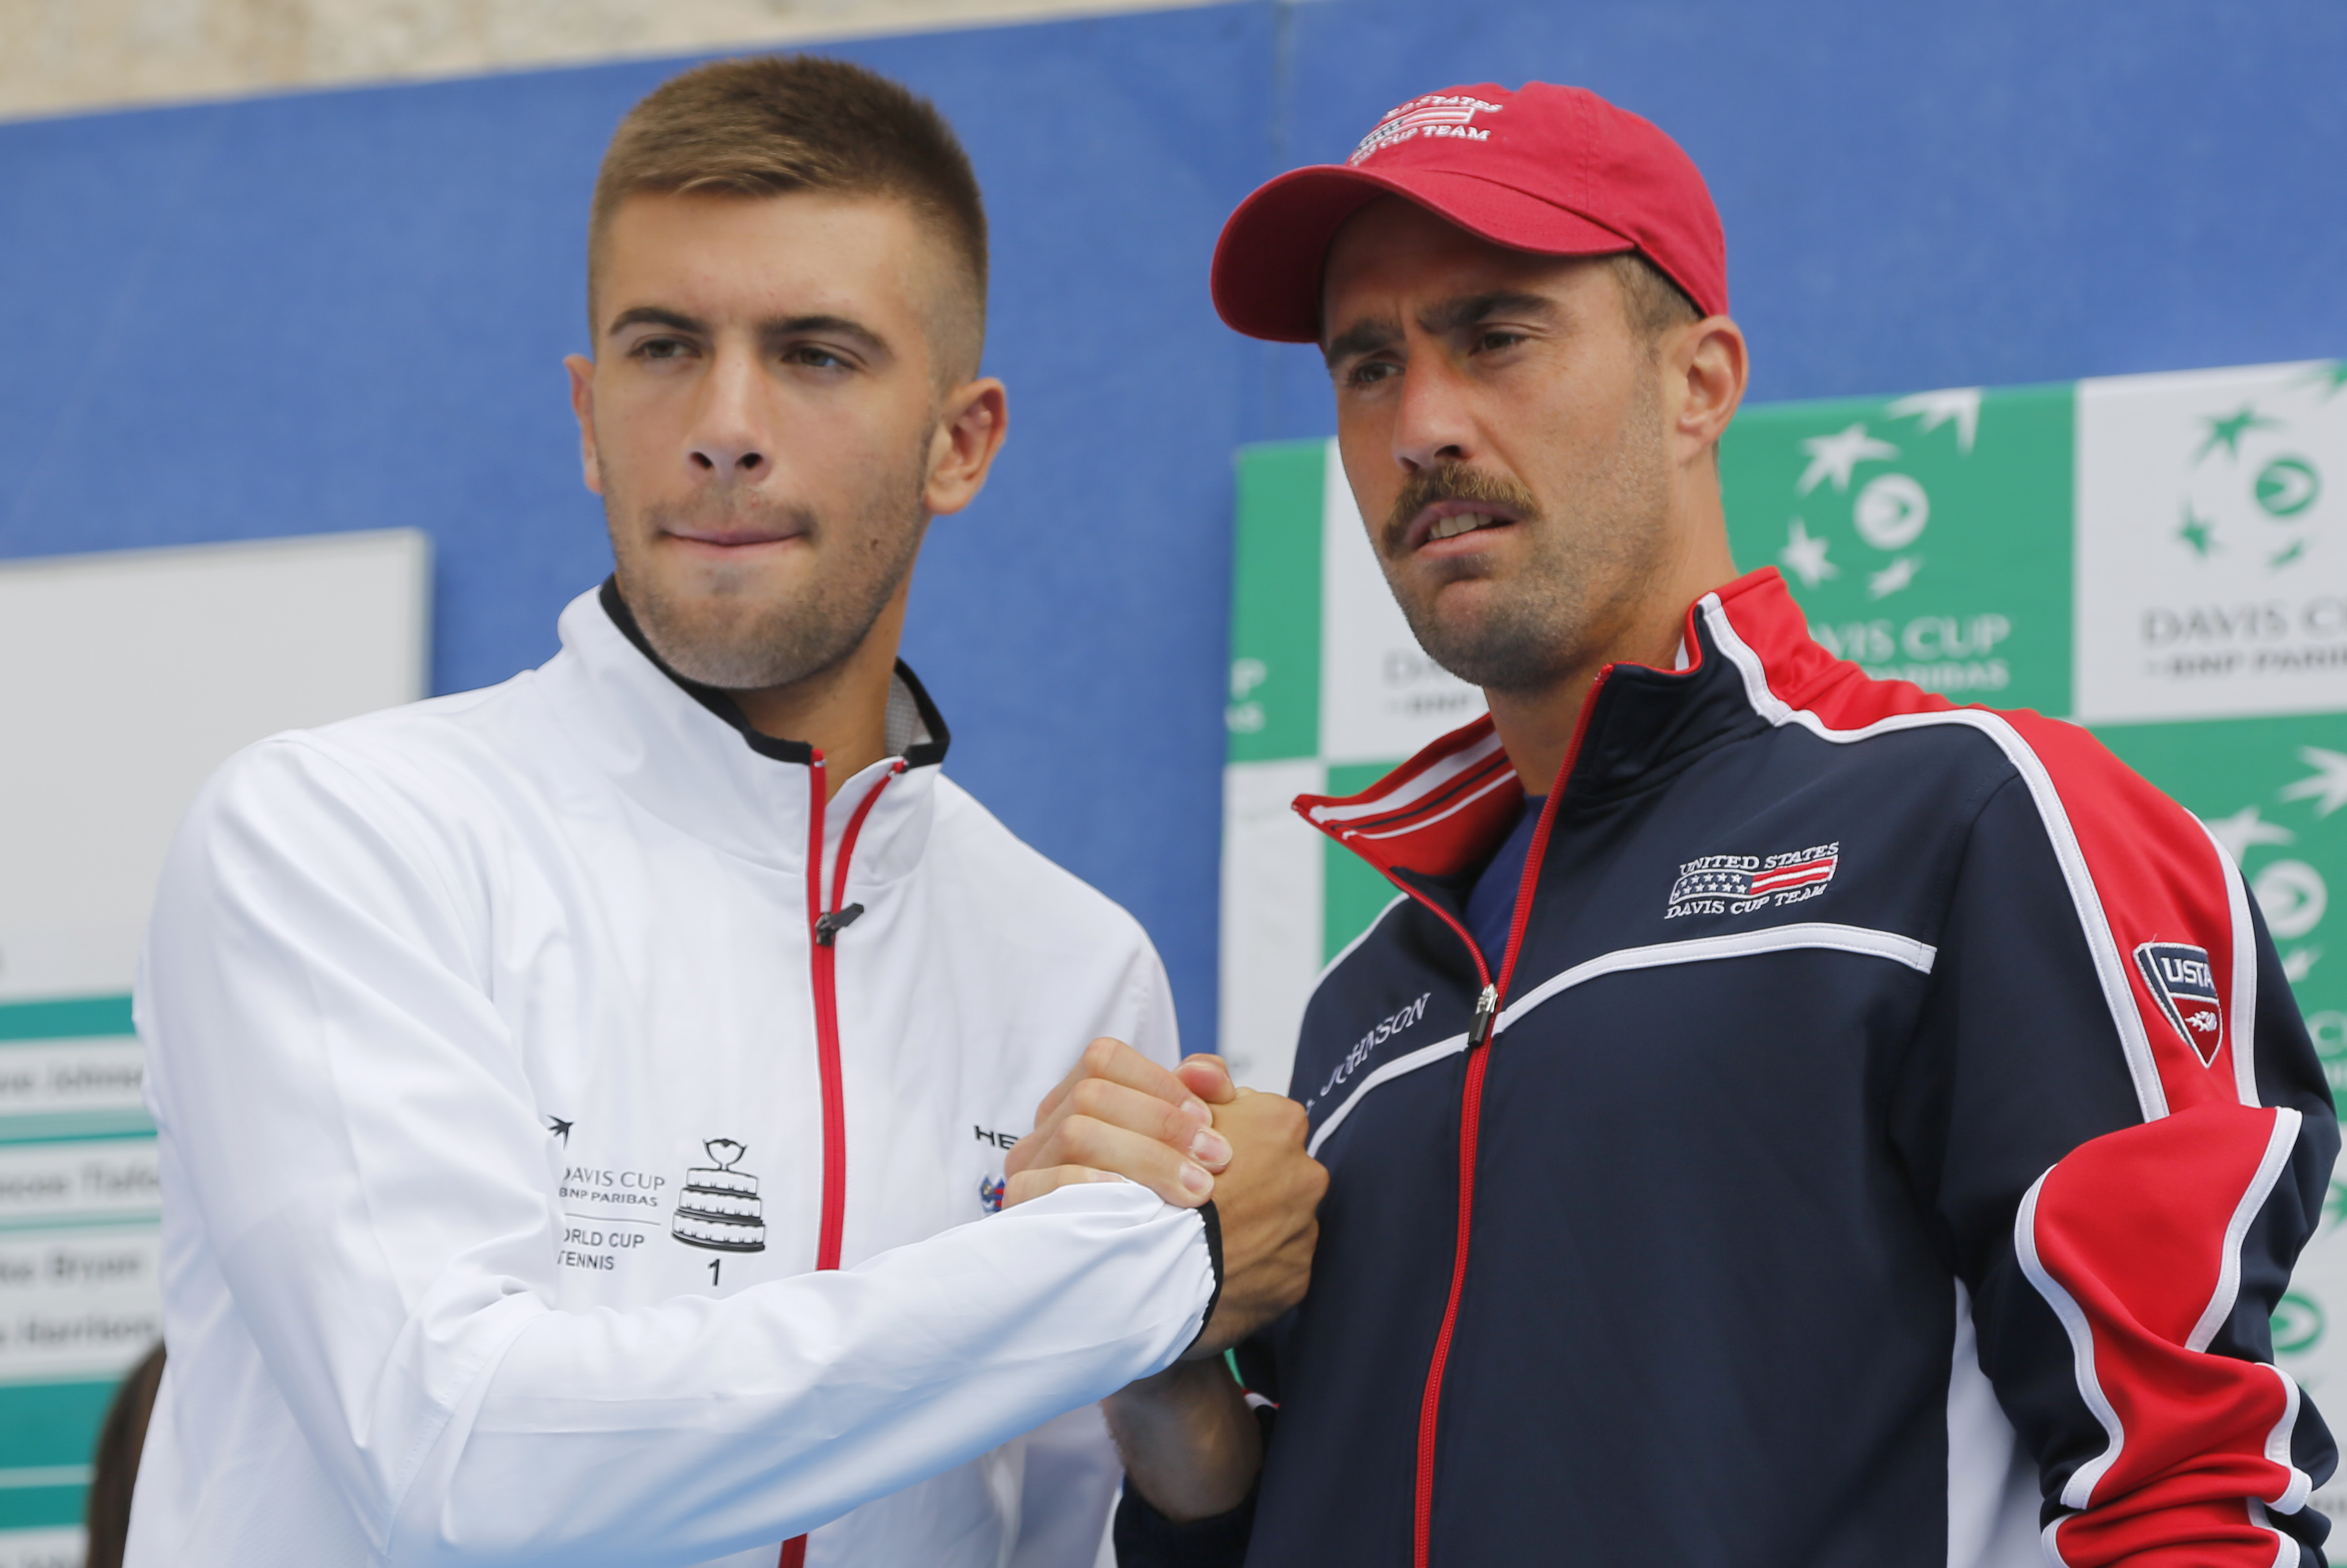 U.S. Davis Cup team looking for first finals appearance in 11 years